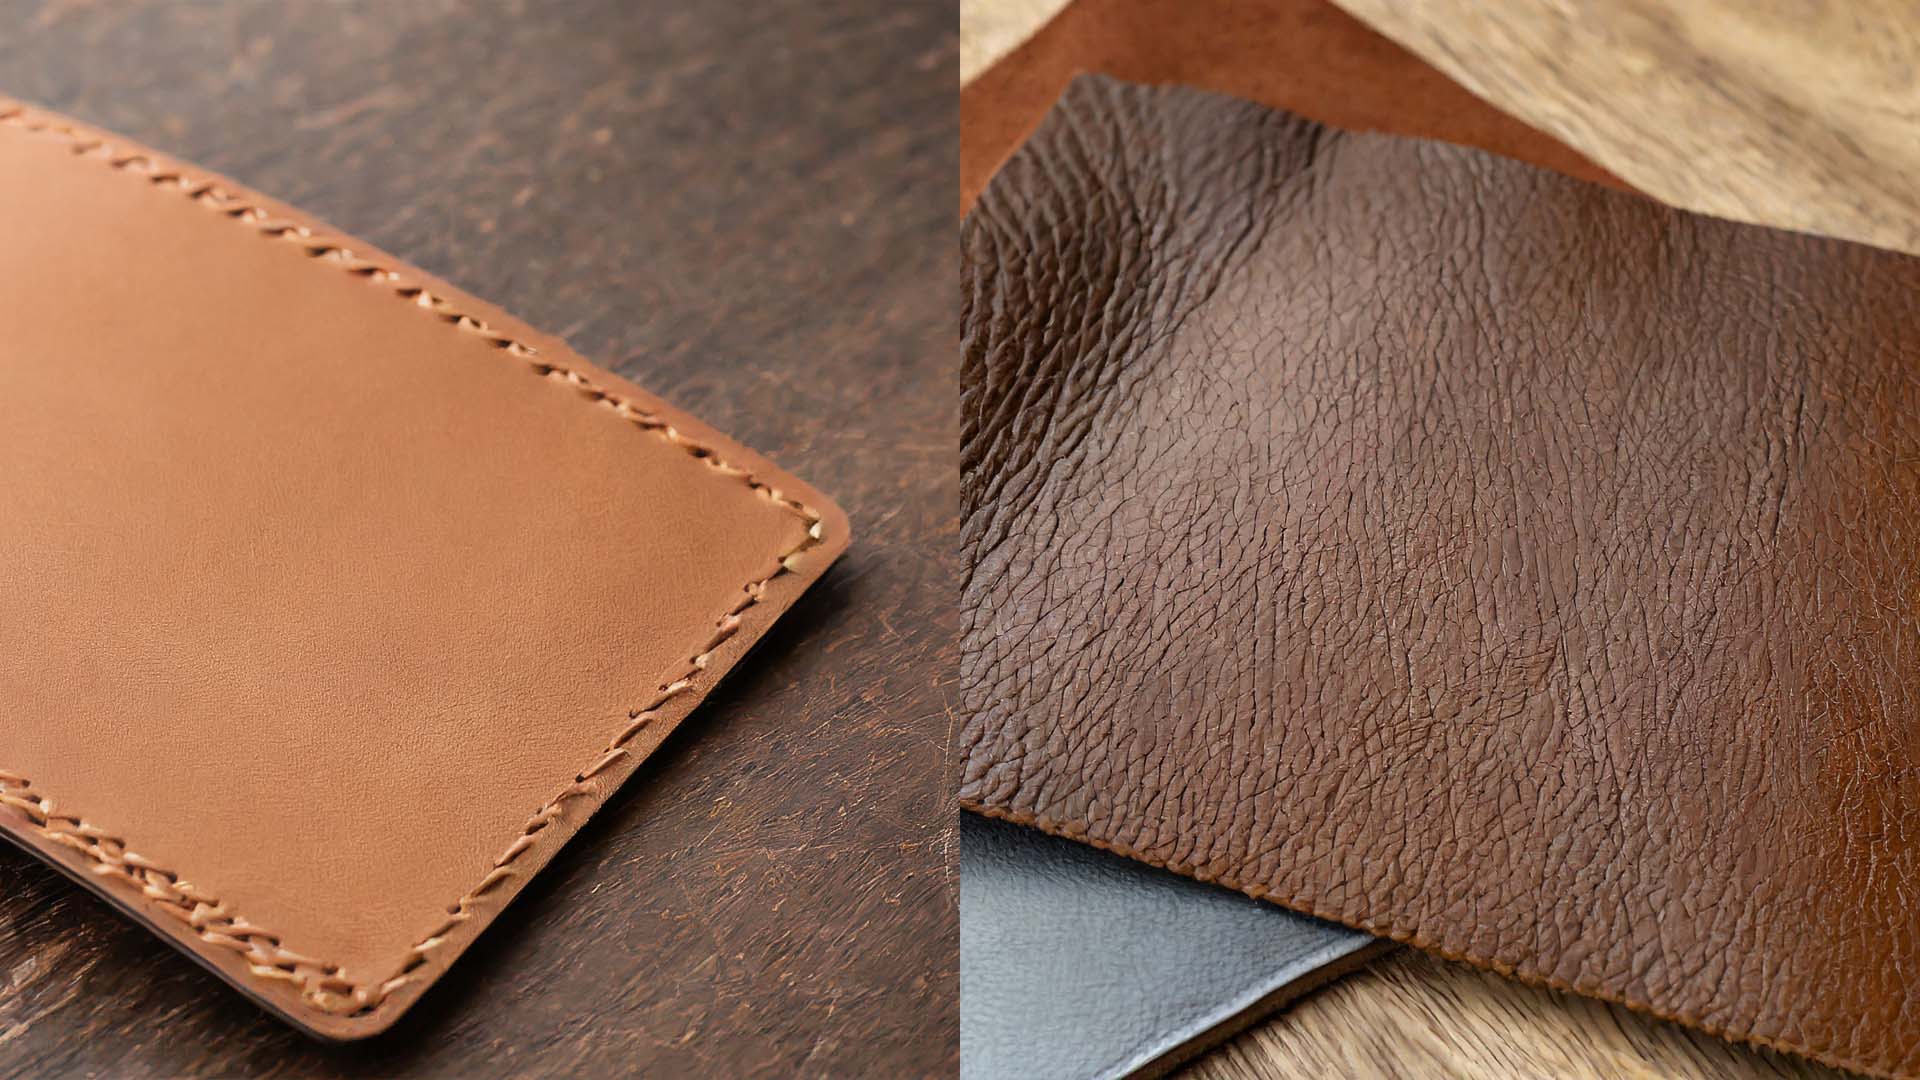 Top grain and full grain leather swatch samples.